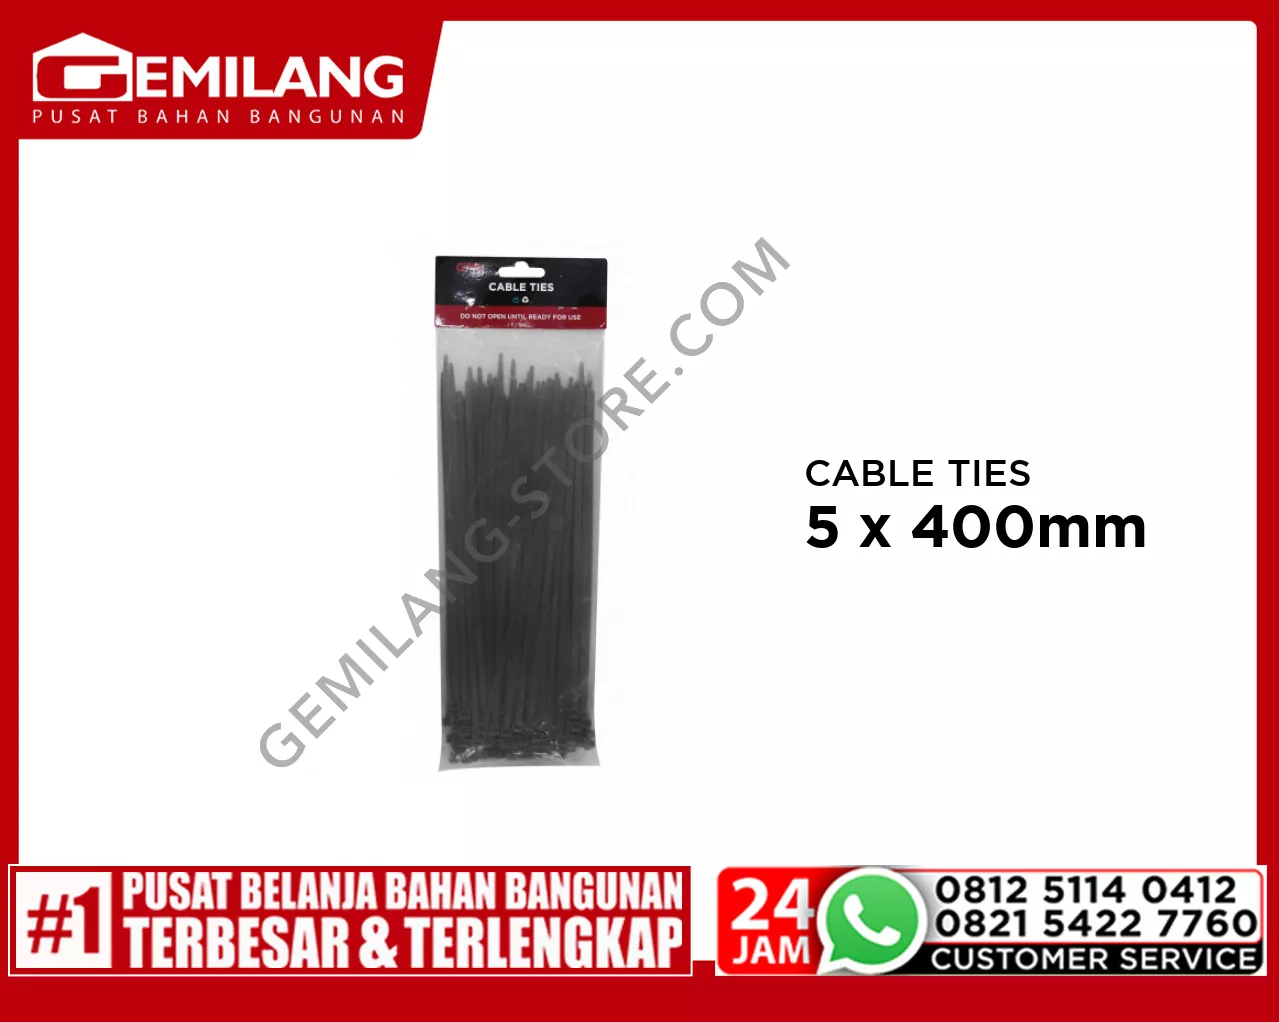 GML CABLE TIES 5 x 400mm HITAM GEMCT006A